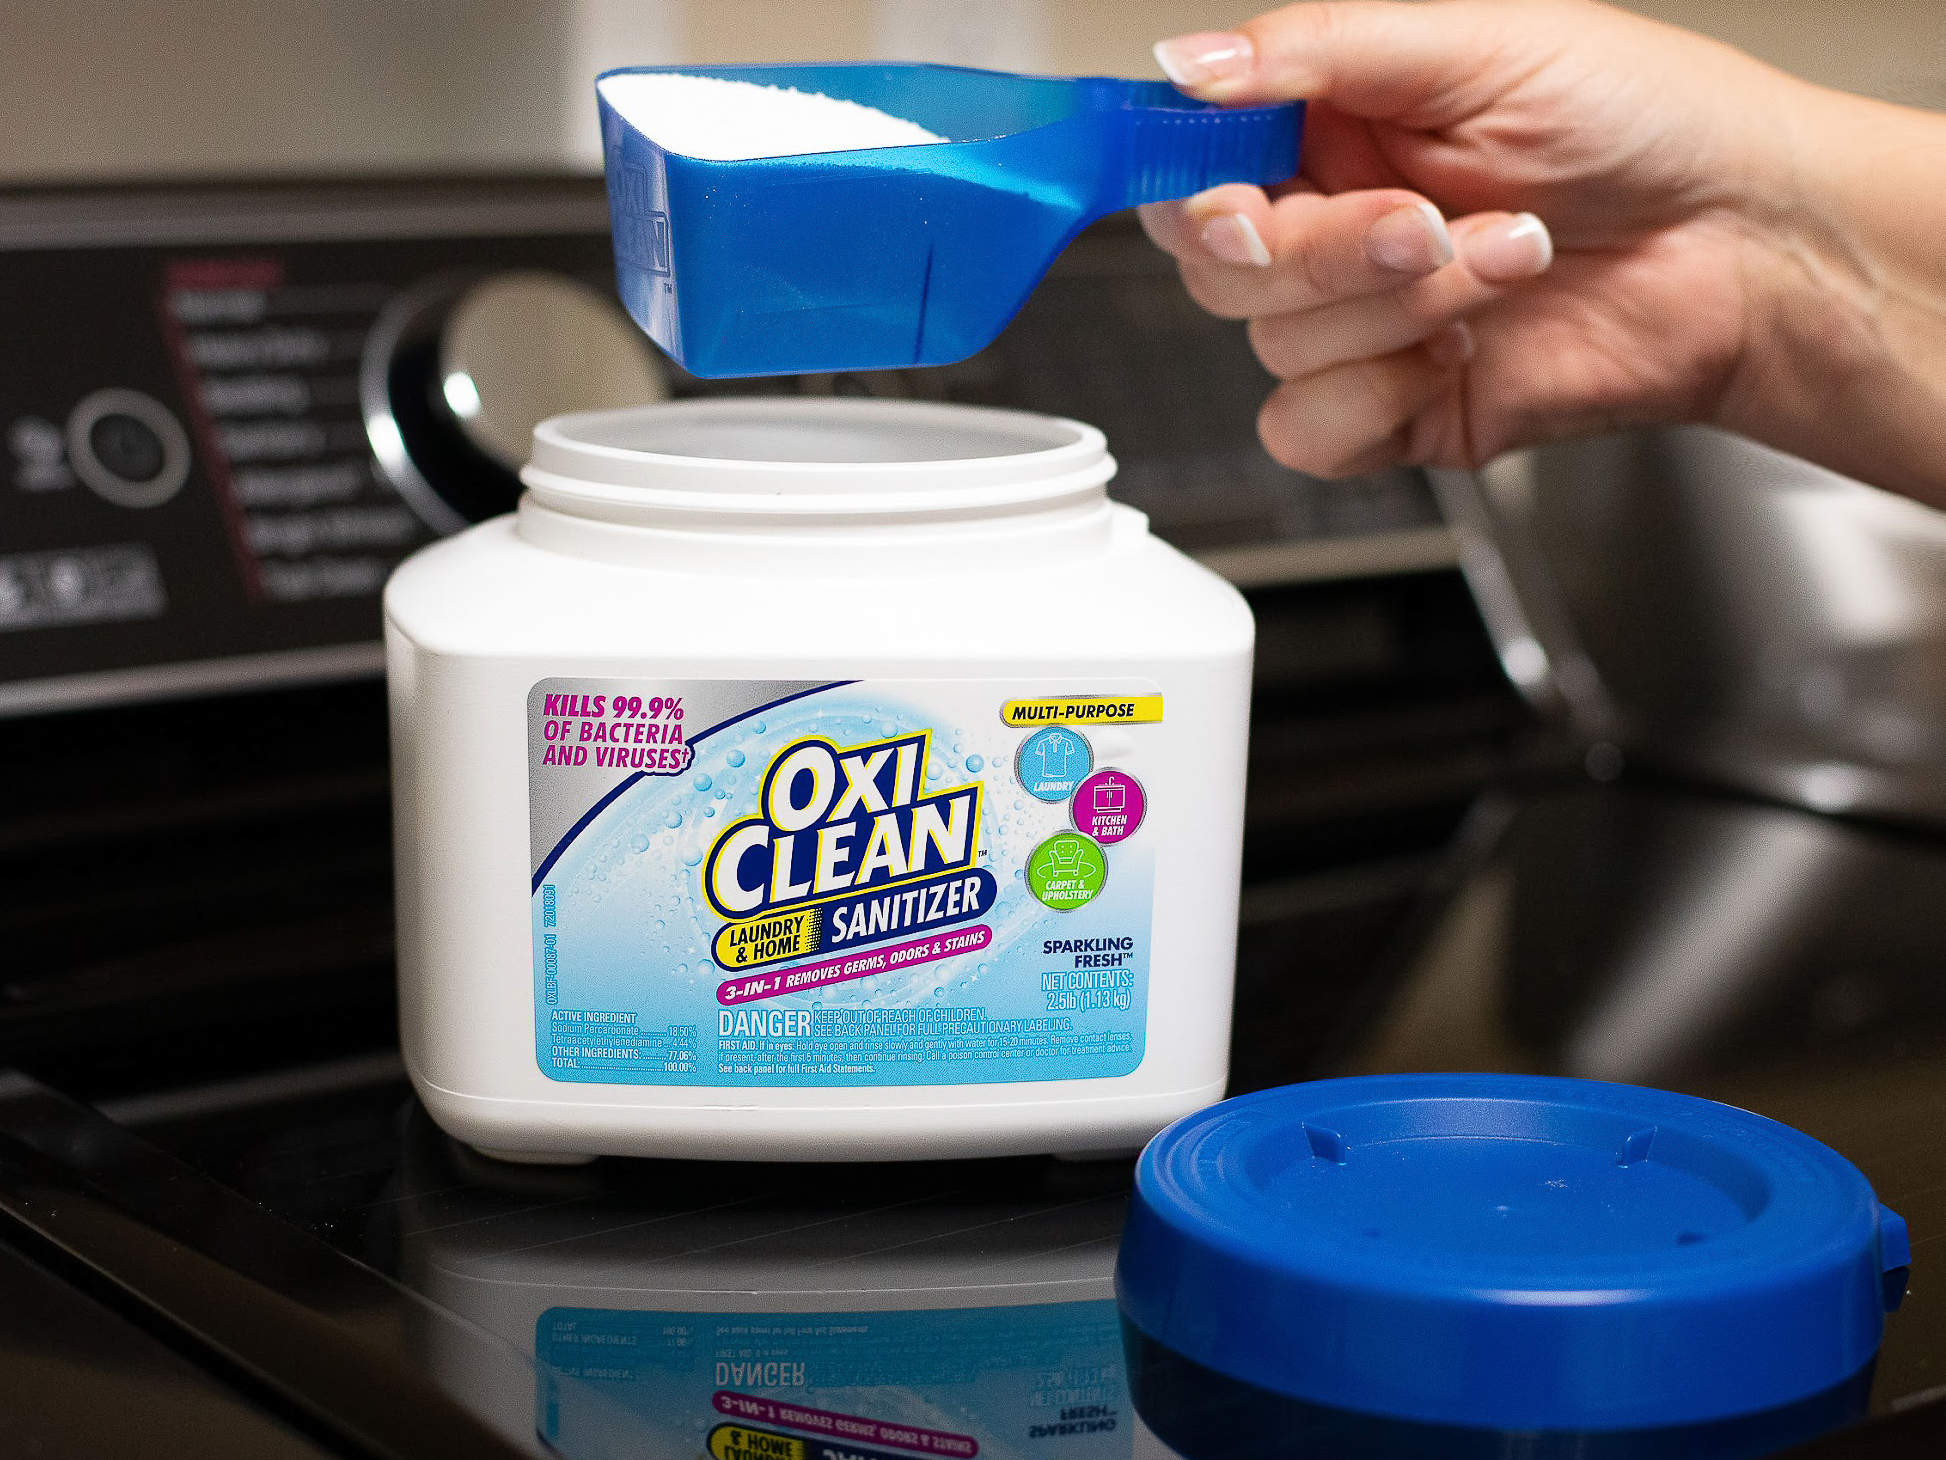 Try New OxiClean™ Laundry & Home Sanitizer And Get Things Clean, Clean! on I Heart Publix 2